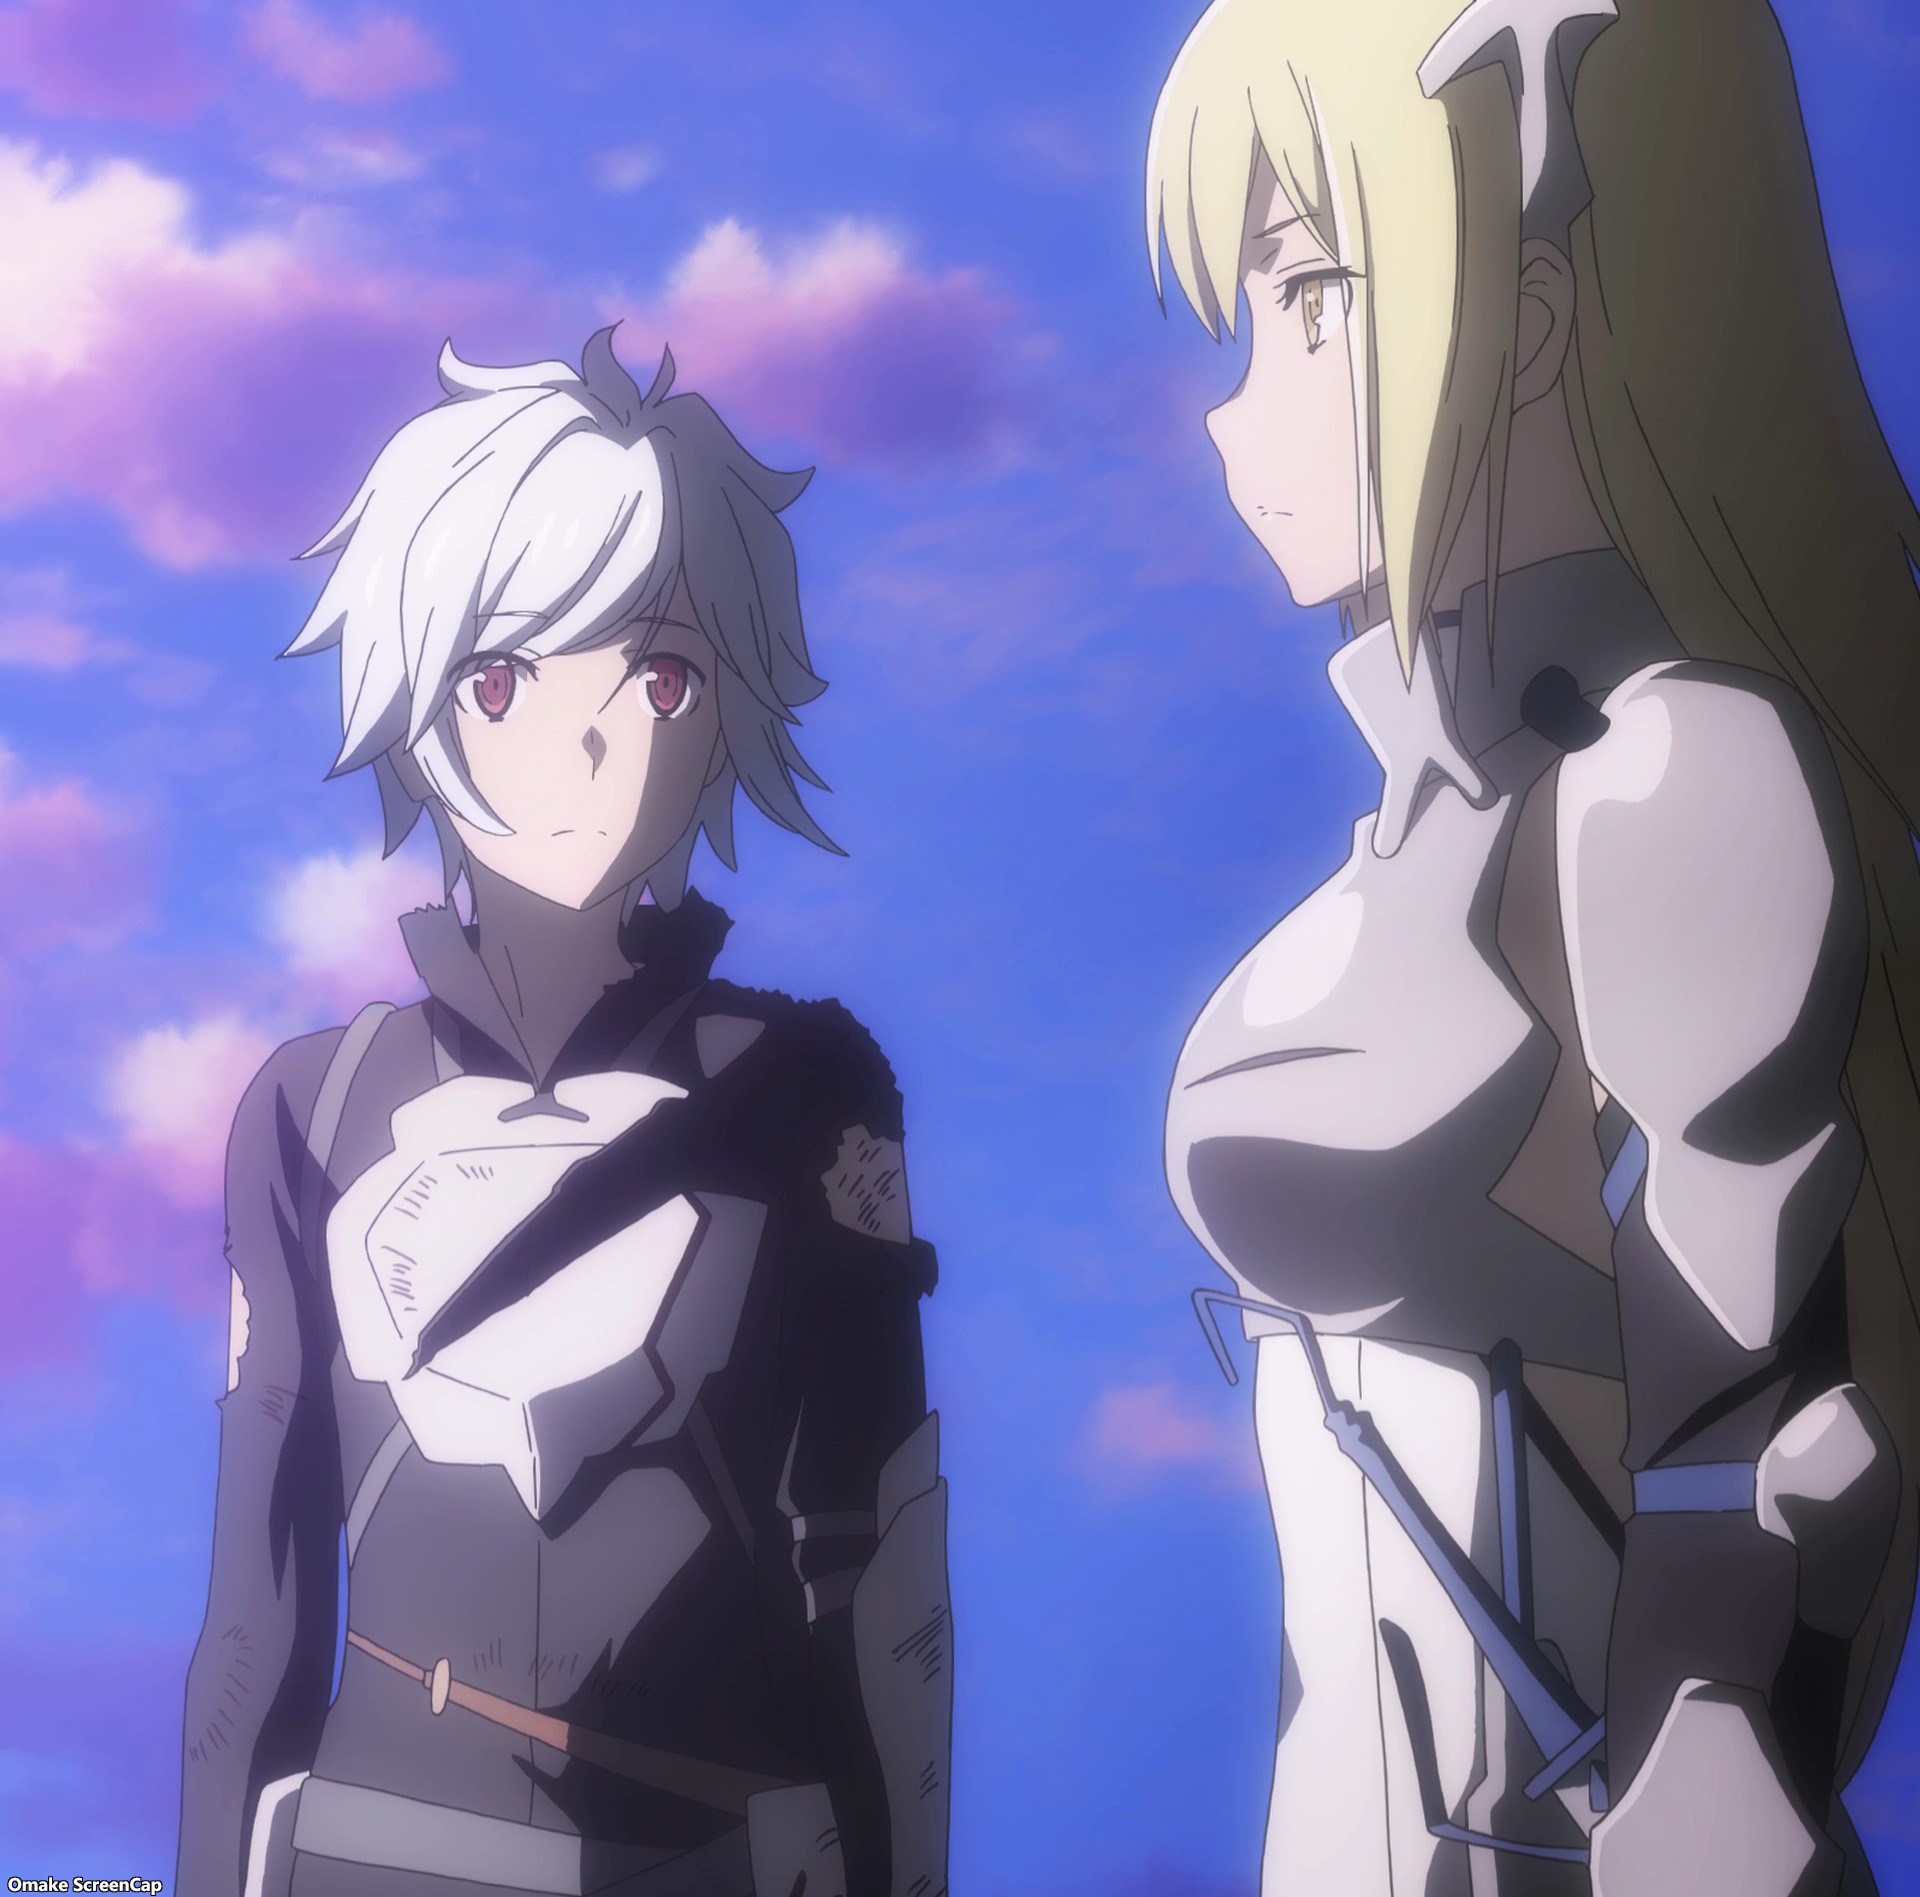 Asterion solo #asterion#danmachi#bellcranel#solovers#recommendations#f